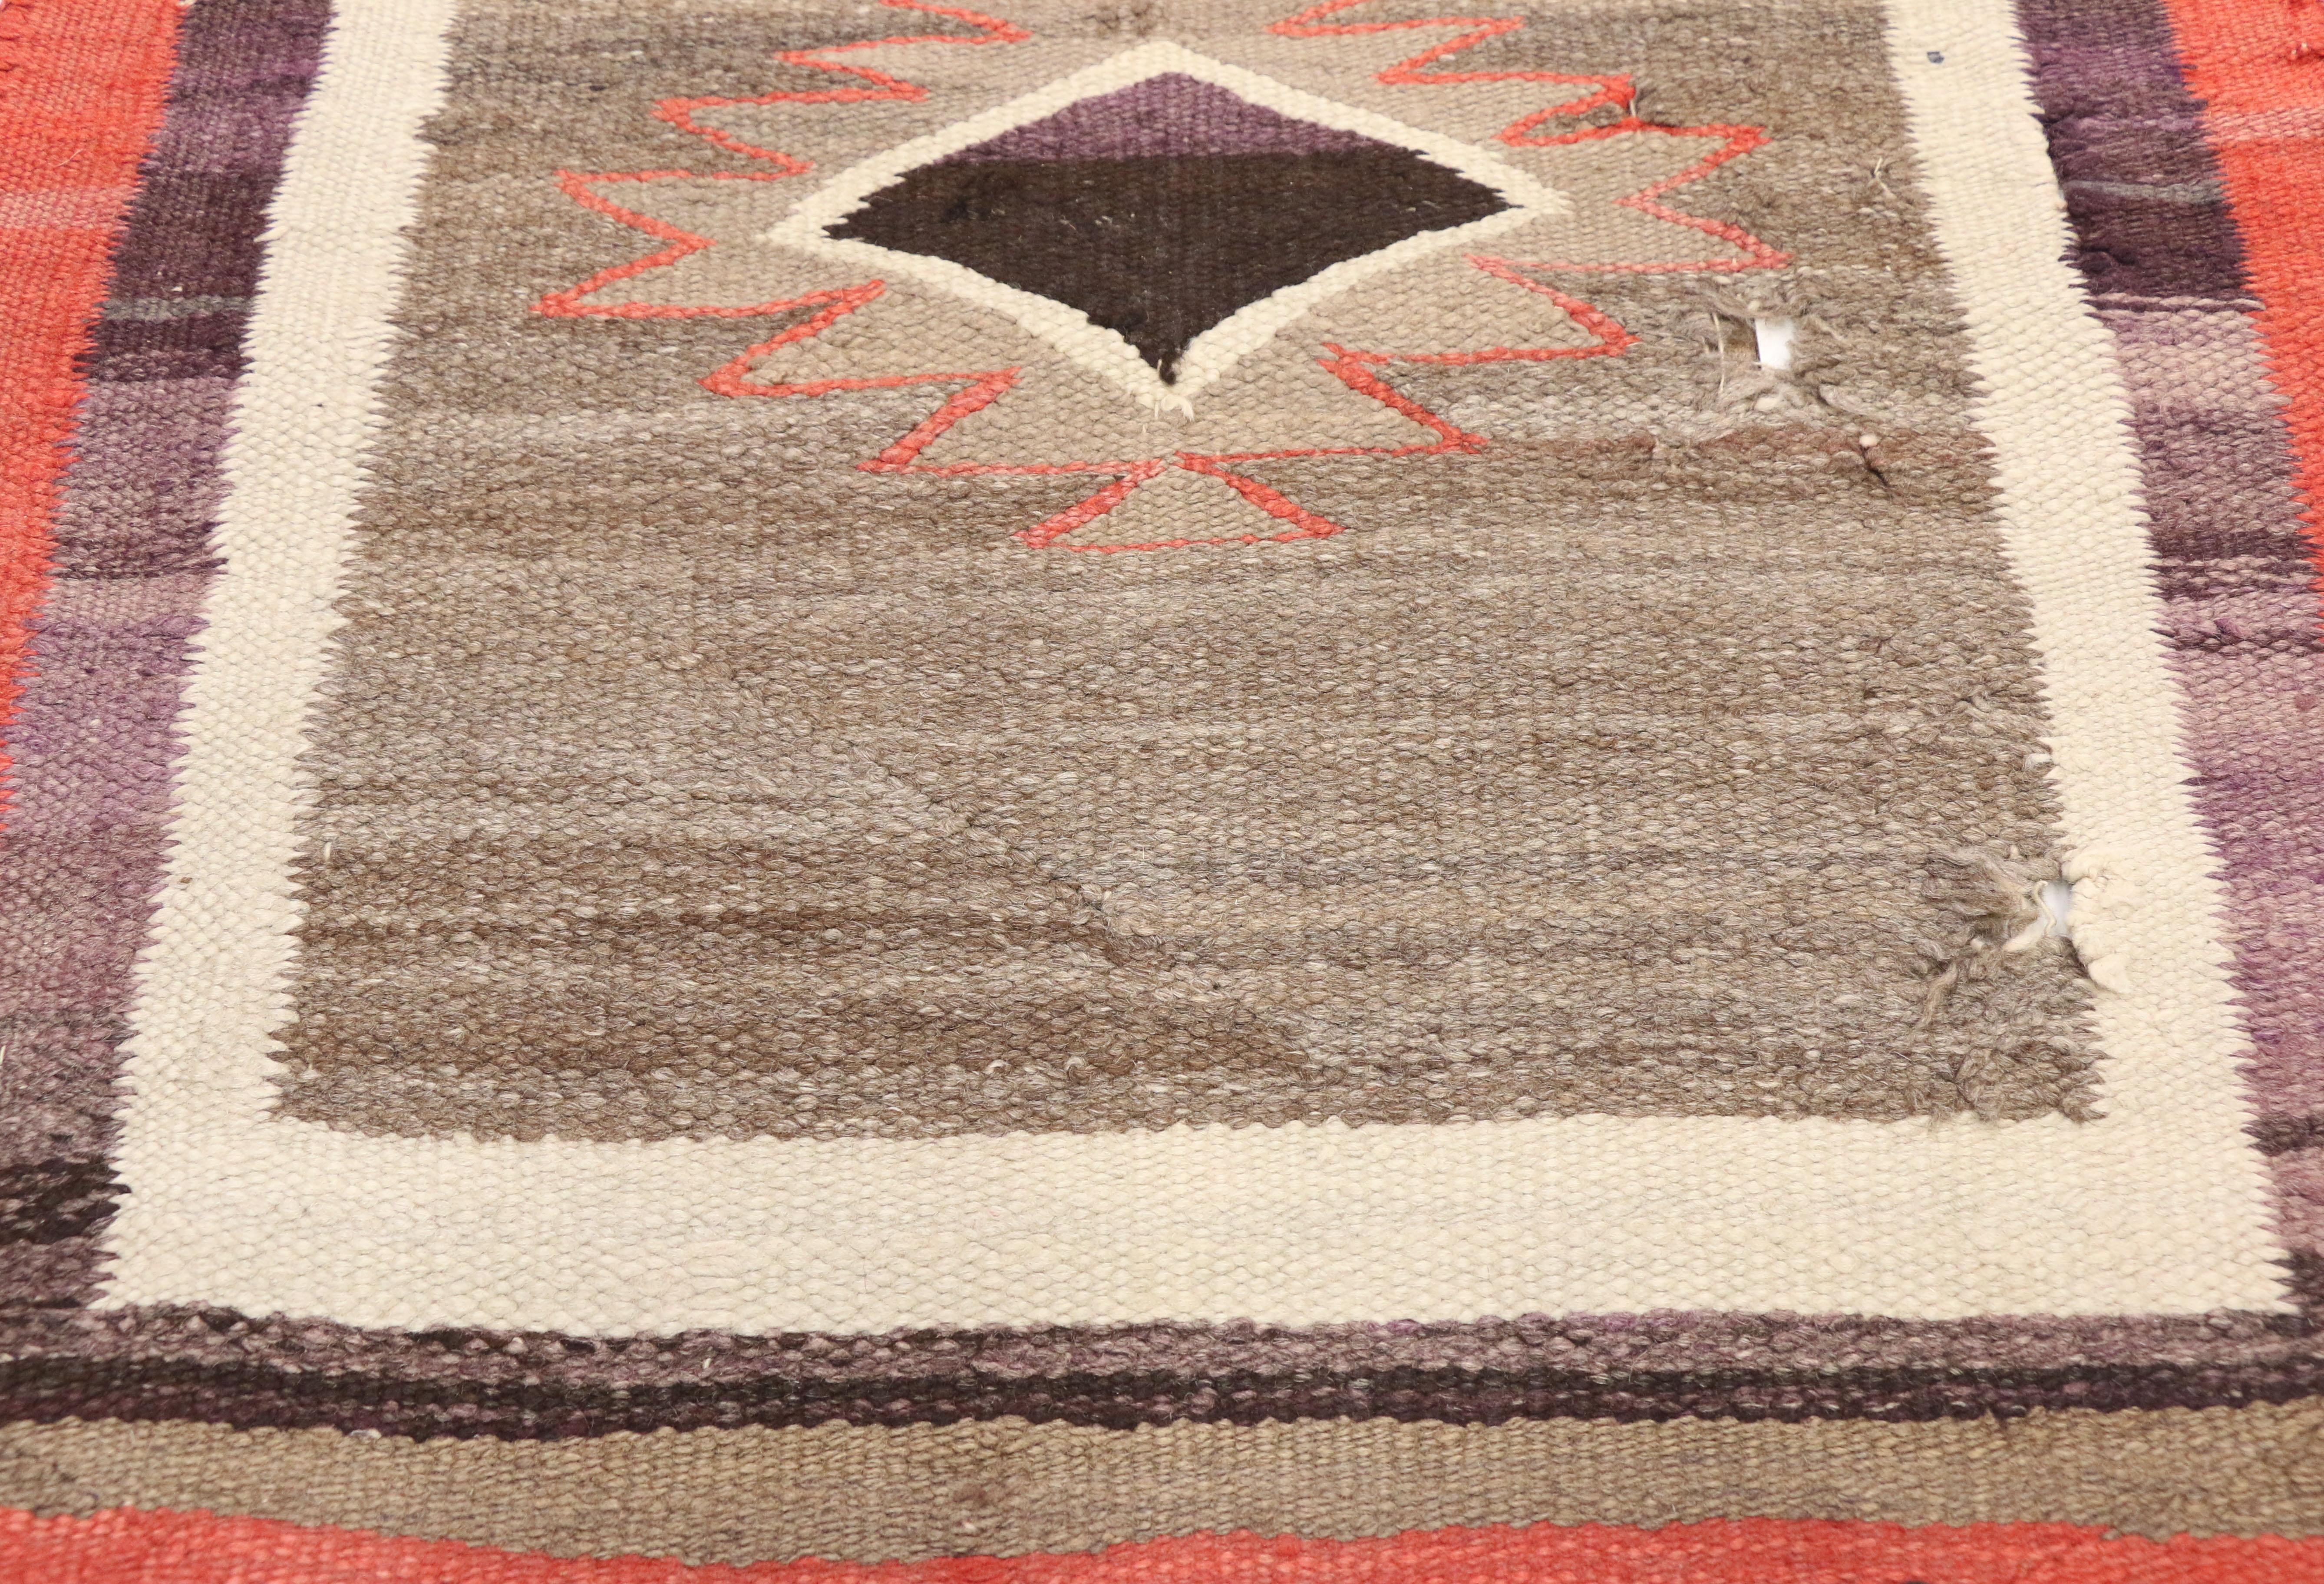 Hand-Woven Native American Antique Indian Navajo Kilim Rug with Southwest Style